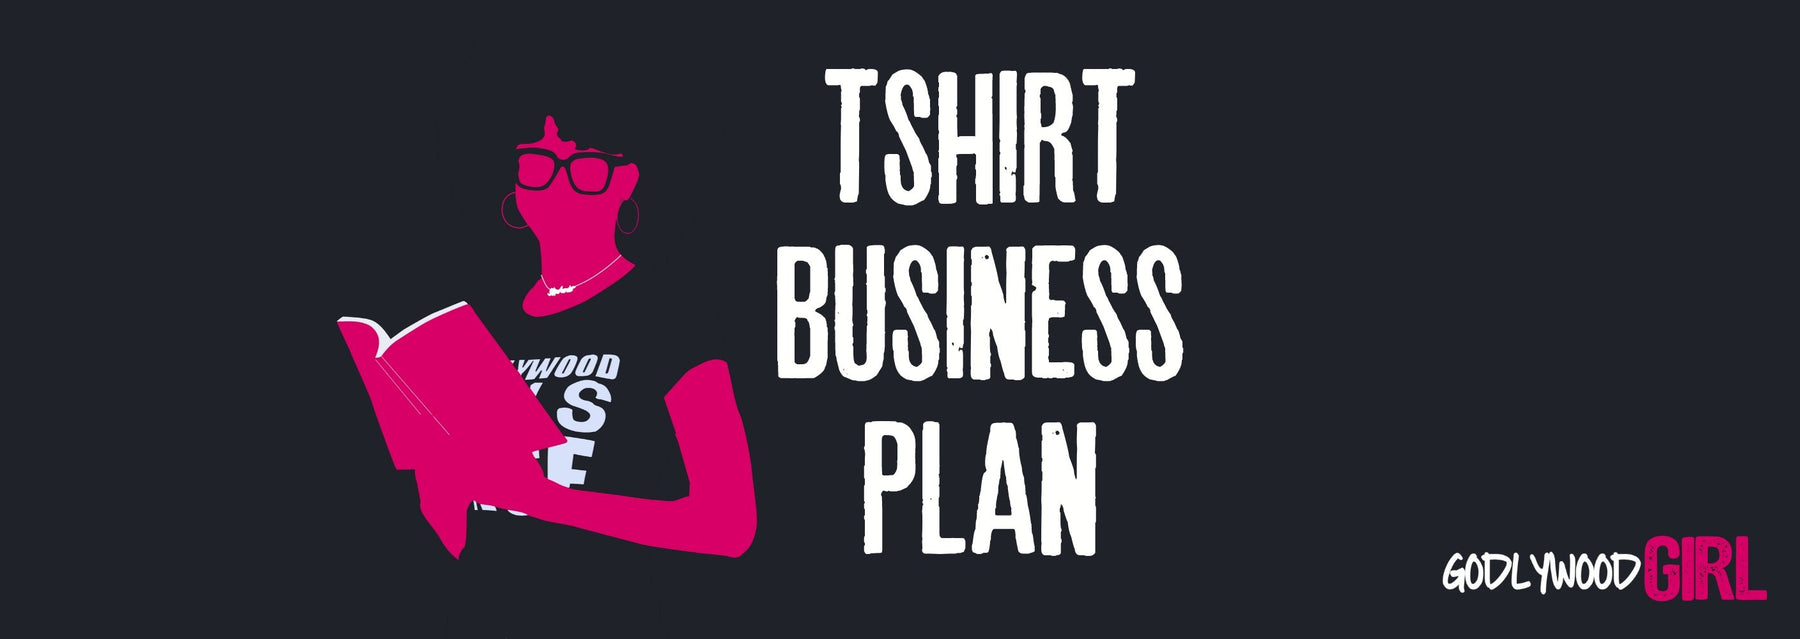 T Shirt Business Plan 2020 (How to start your own T-shirt business In 2020) | Christian Entrepreneur